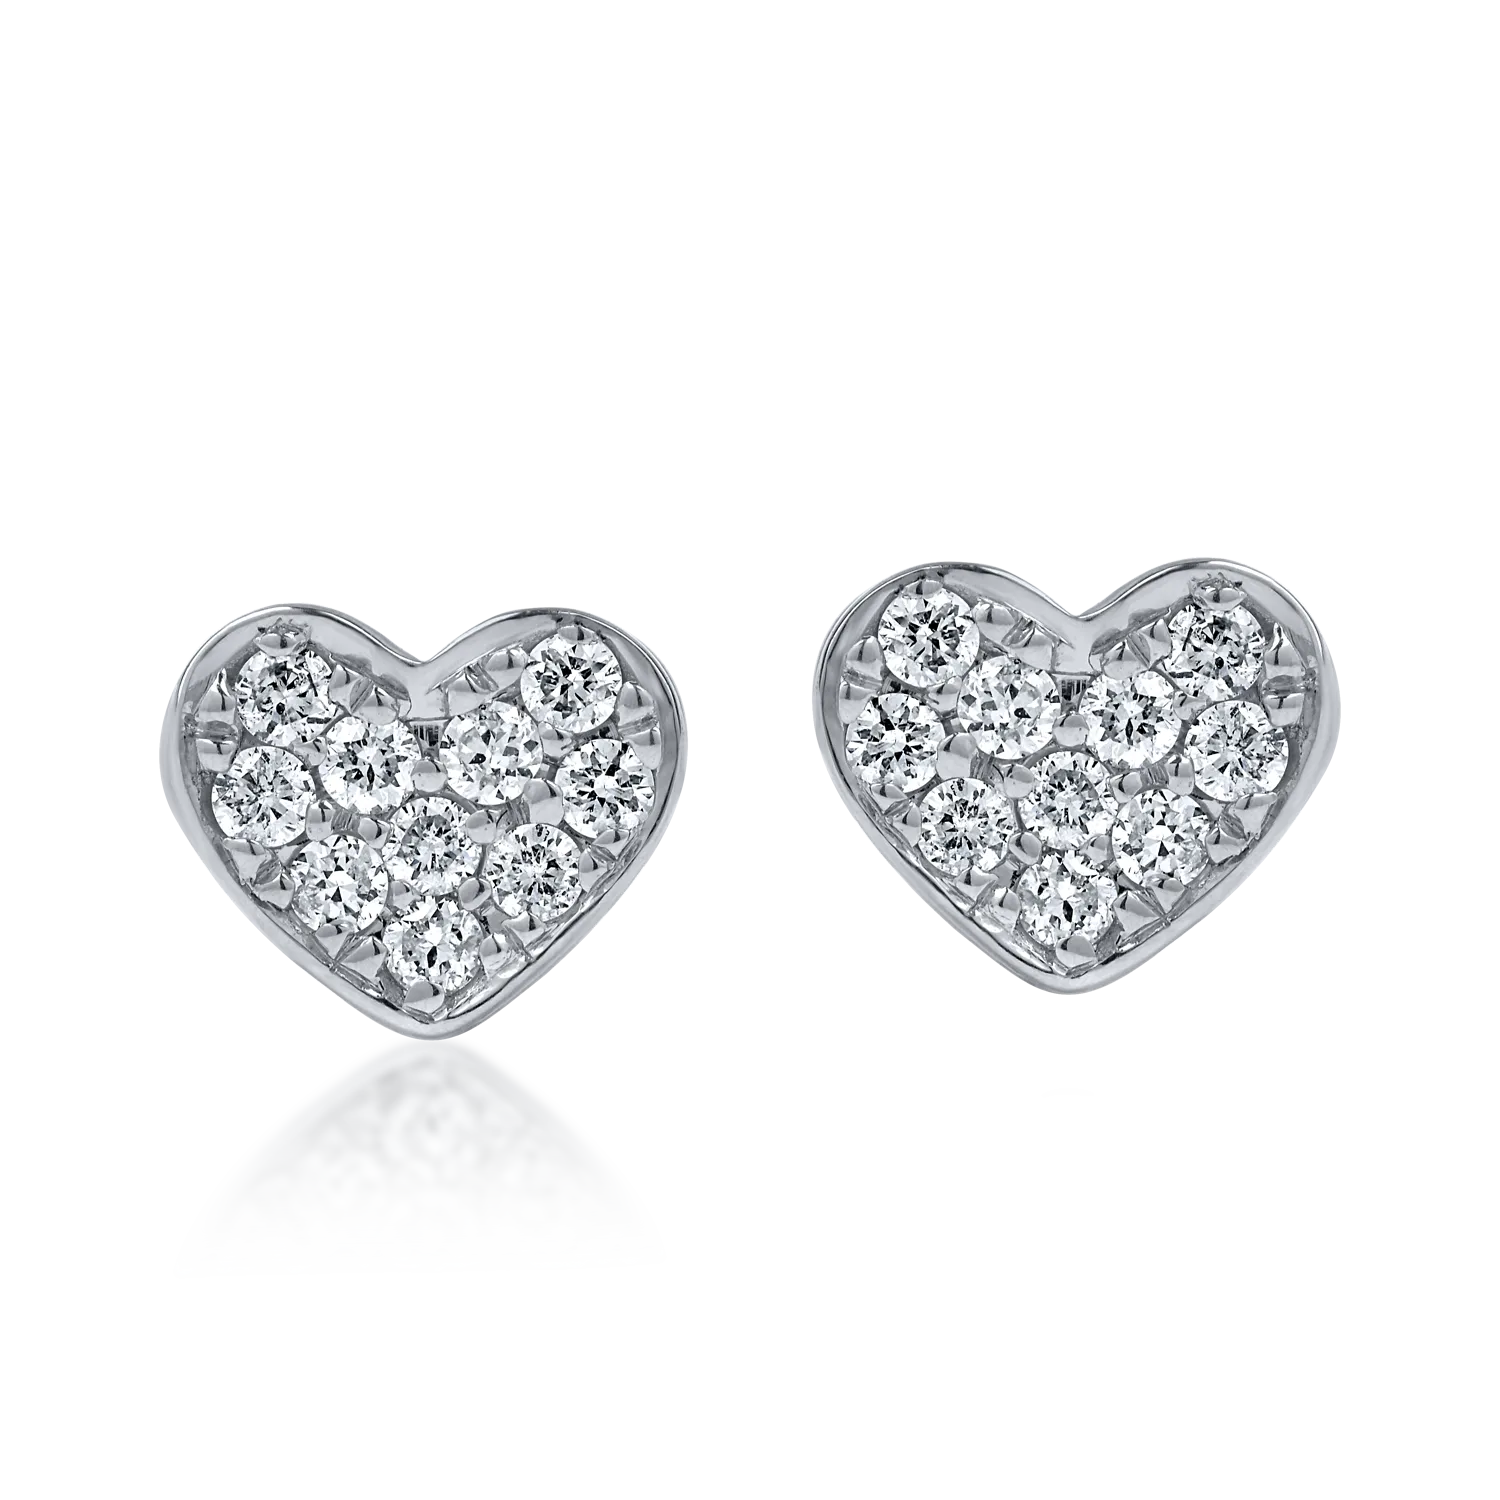 White gold heart earrings with 0.22ct diamonds